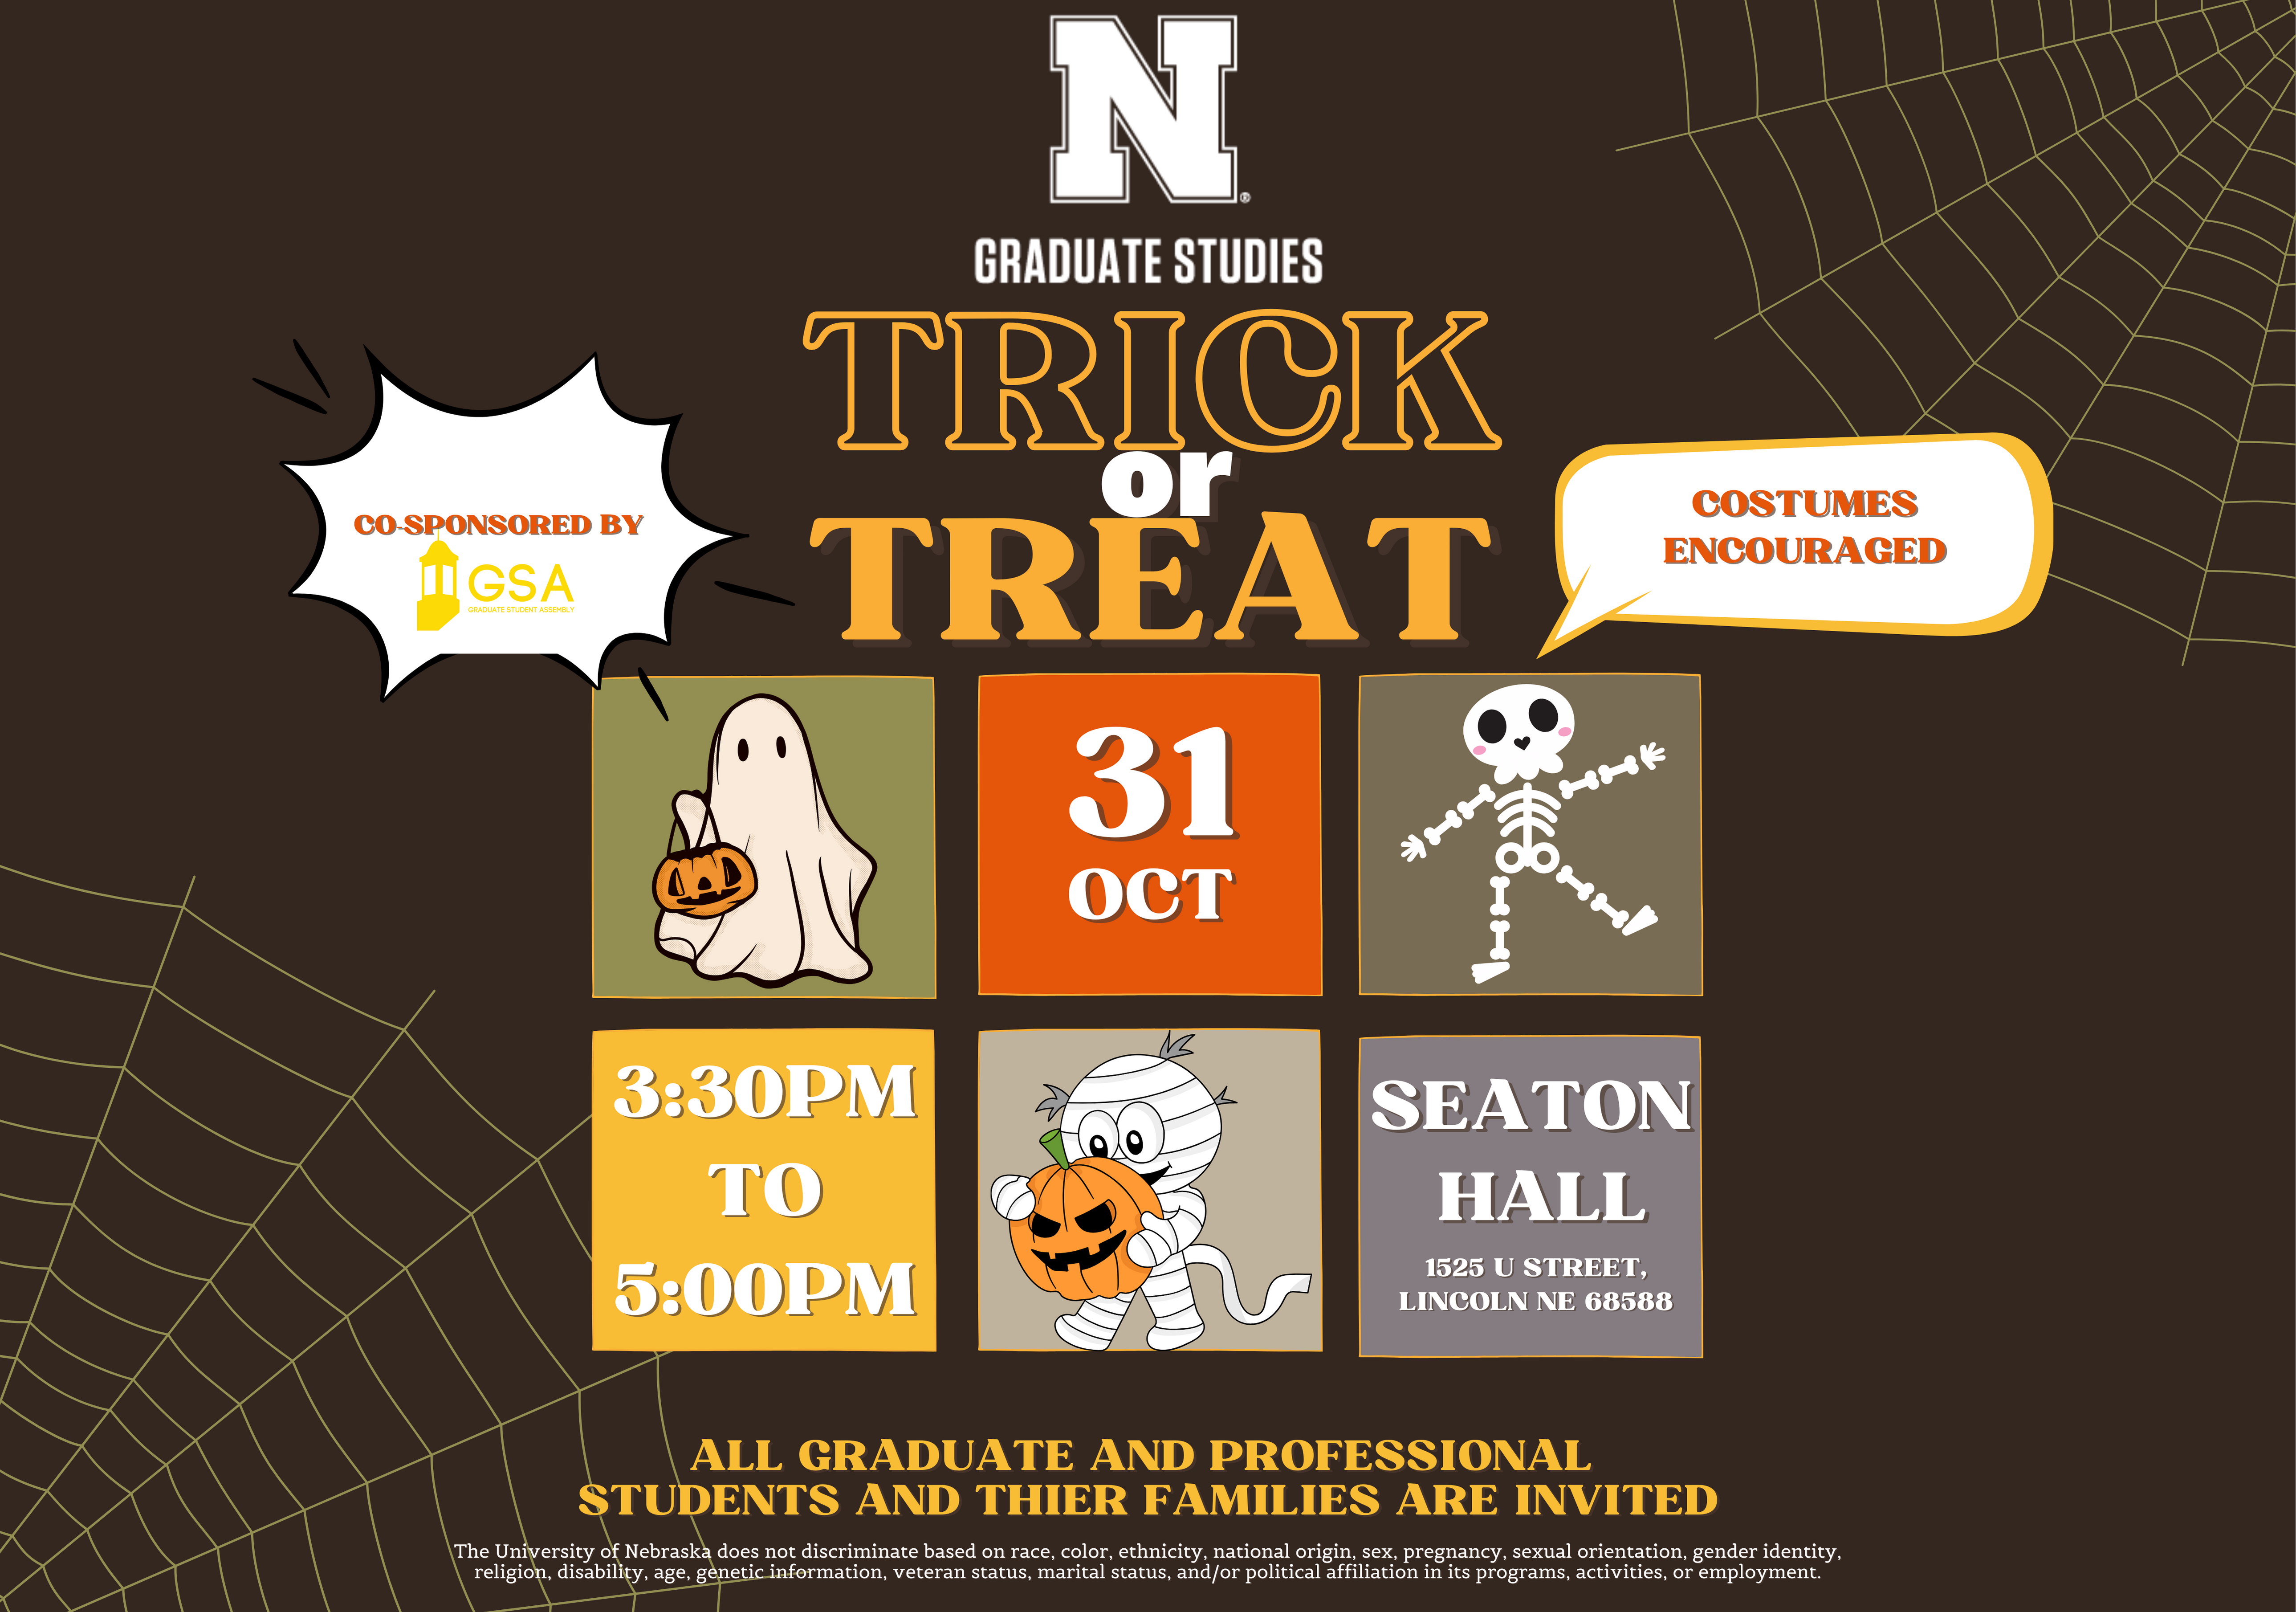 OGS Trick or Treat Event on Tuesday, October 31, 2023, at 3:30 PM - 5:00 PM om Seaton Hall, 1525 U Street Lincoln NE 68588. Co sponsored by Graduate Student Assembly, Costumes Encouraged. All Graduate & Professional students and their families are invited